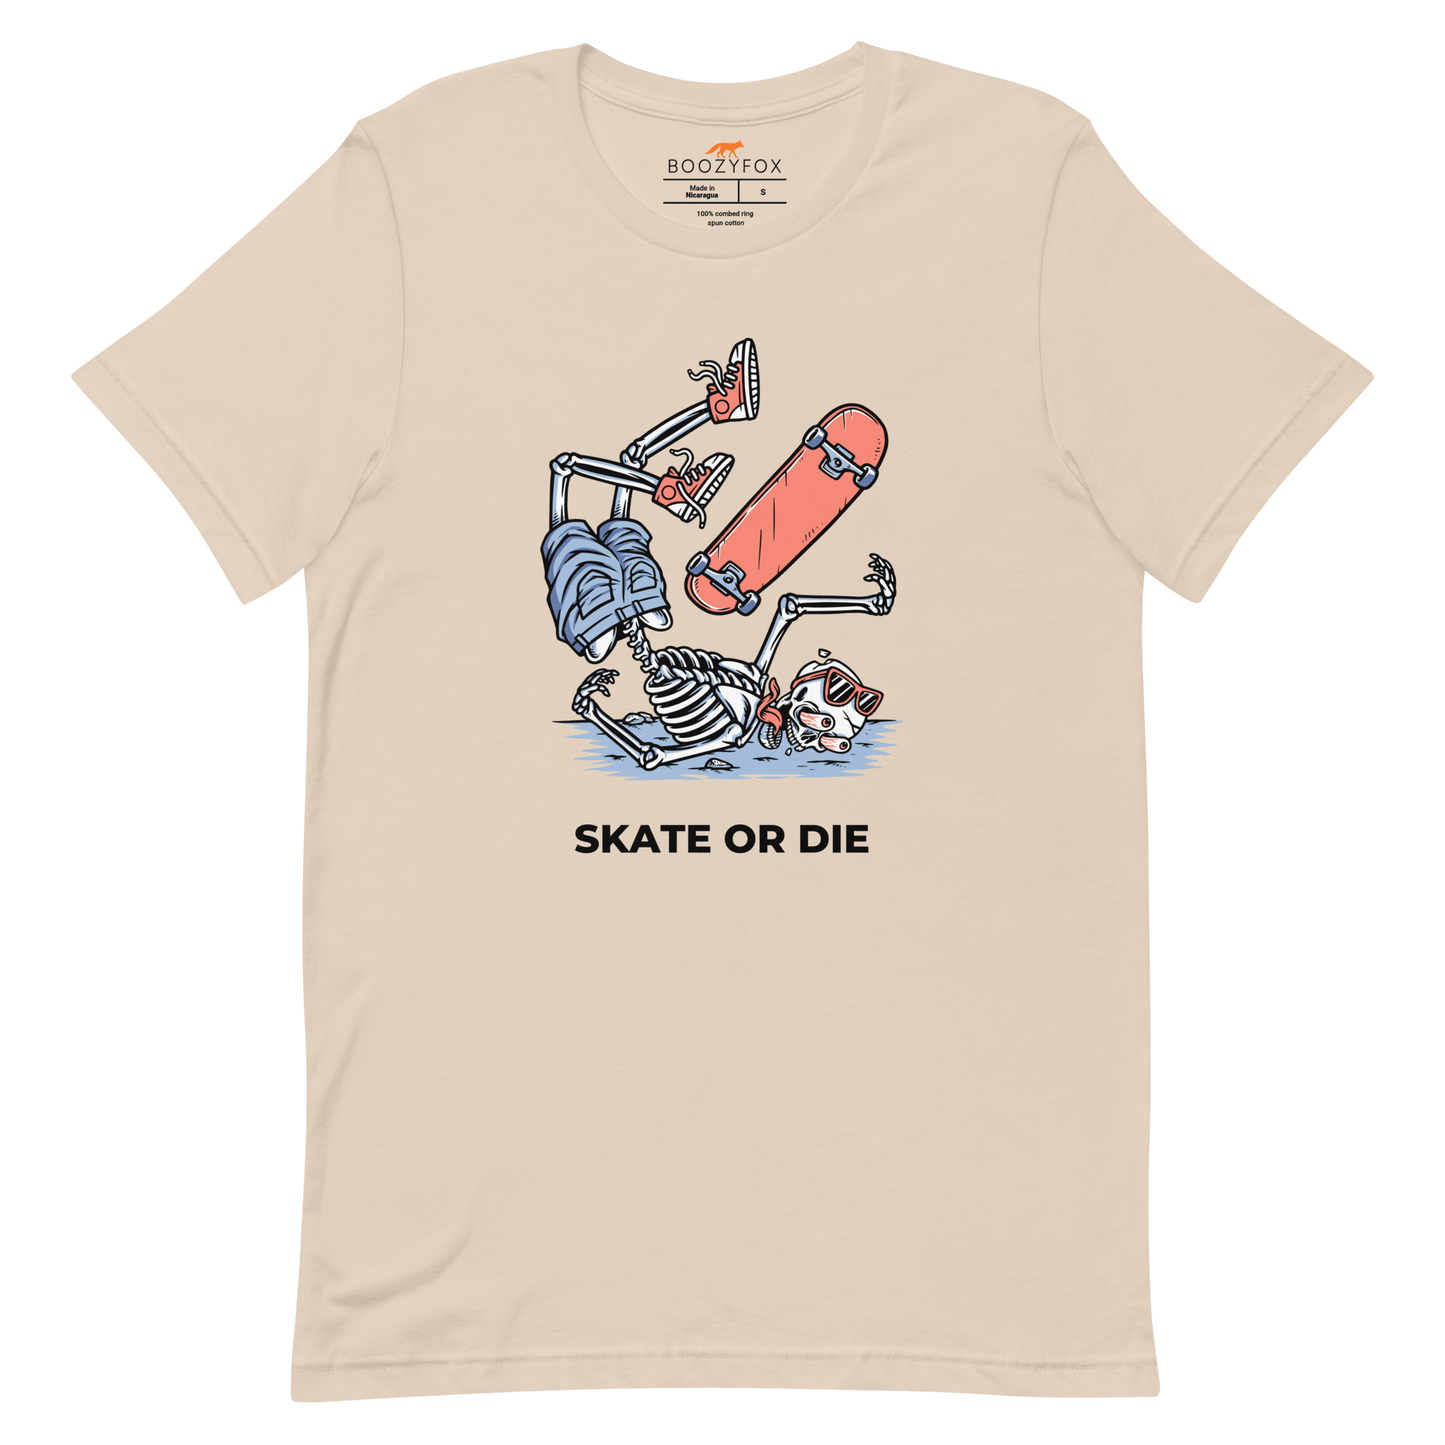 Soft Cream Premium Skate or Die Tee featuring a daring Skeleton Falling While Skateboarding graphic on the chest - Funny Graphic Skeleton Tees - Boozy Fox